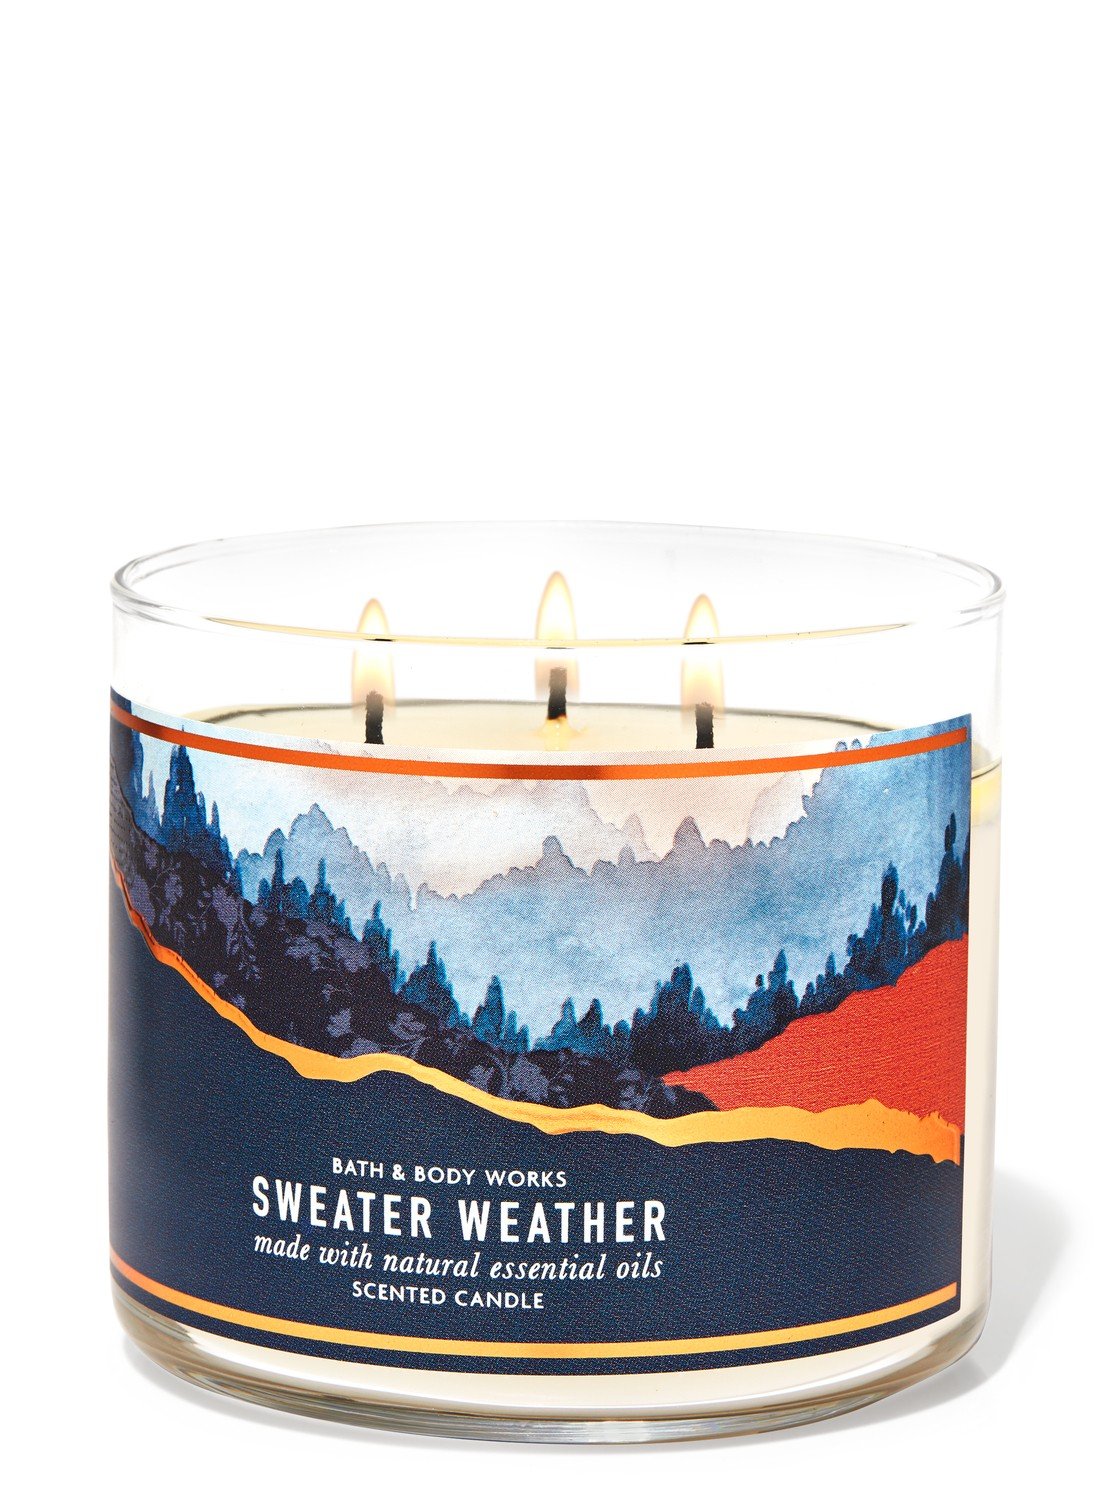 1 Bath & Body Works SWEATER WEATHER Large 3-Wick Candle 14.5 oz